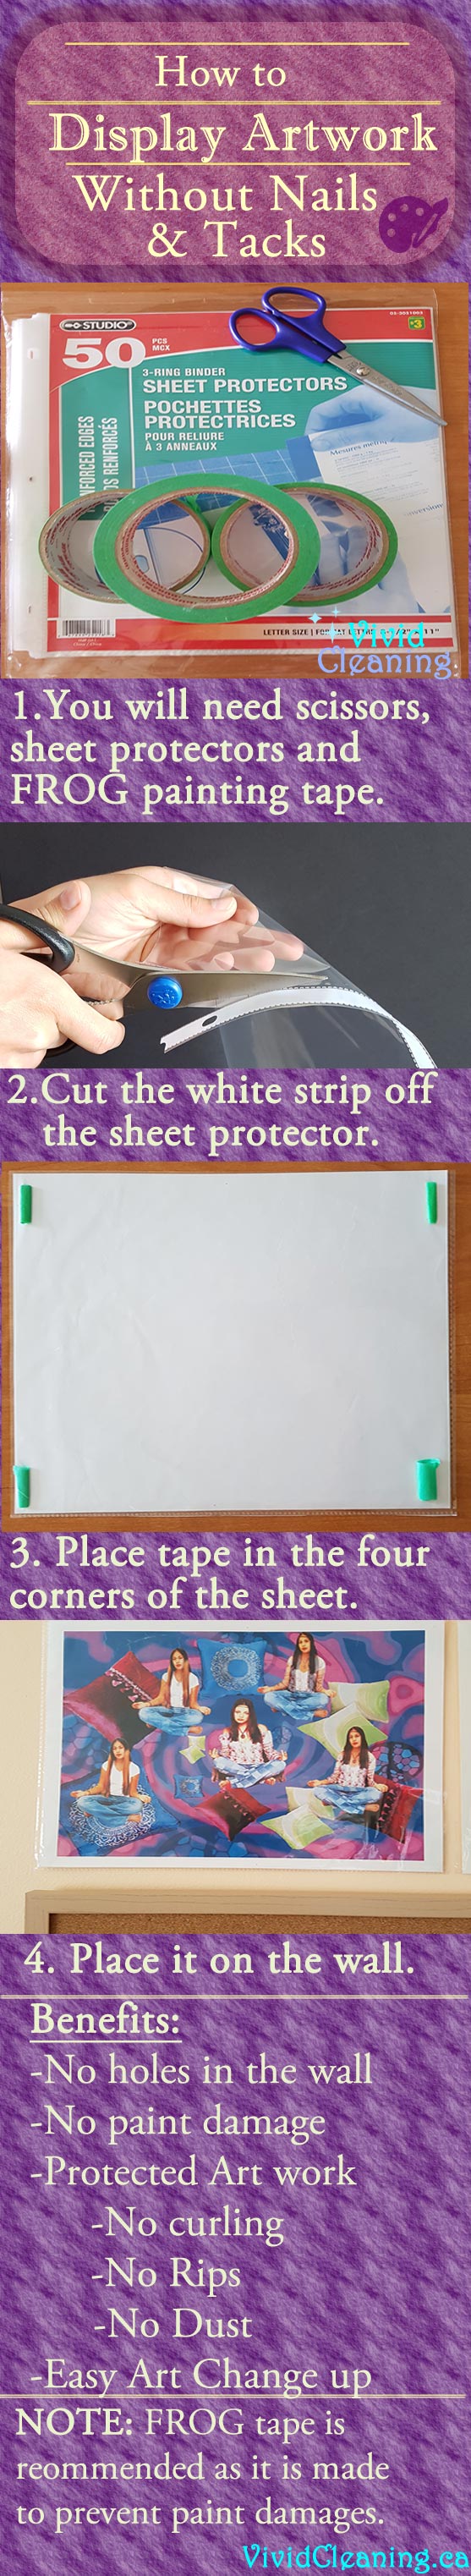 You will need protective sheets, scissors and painting tape. Start with cutting off the white edge on the protective sheet. Insert the artwork inside the sheet and turn it face down. Next apply tape to the four corners of the sheet. Place it on the wall space you want to display it.